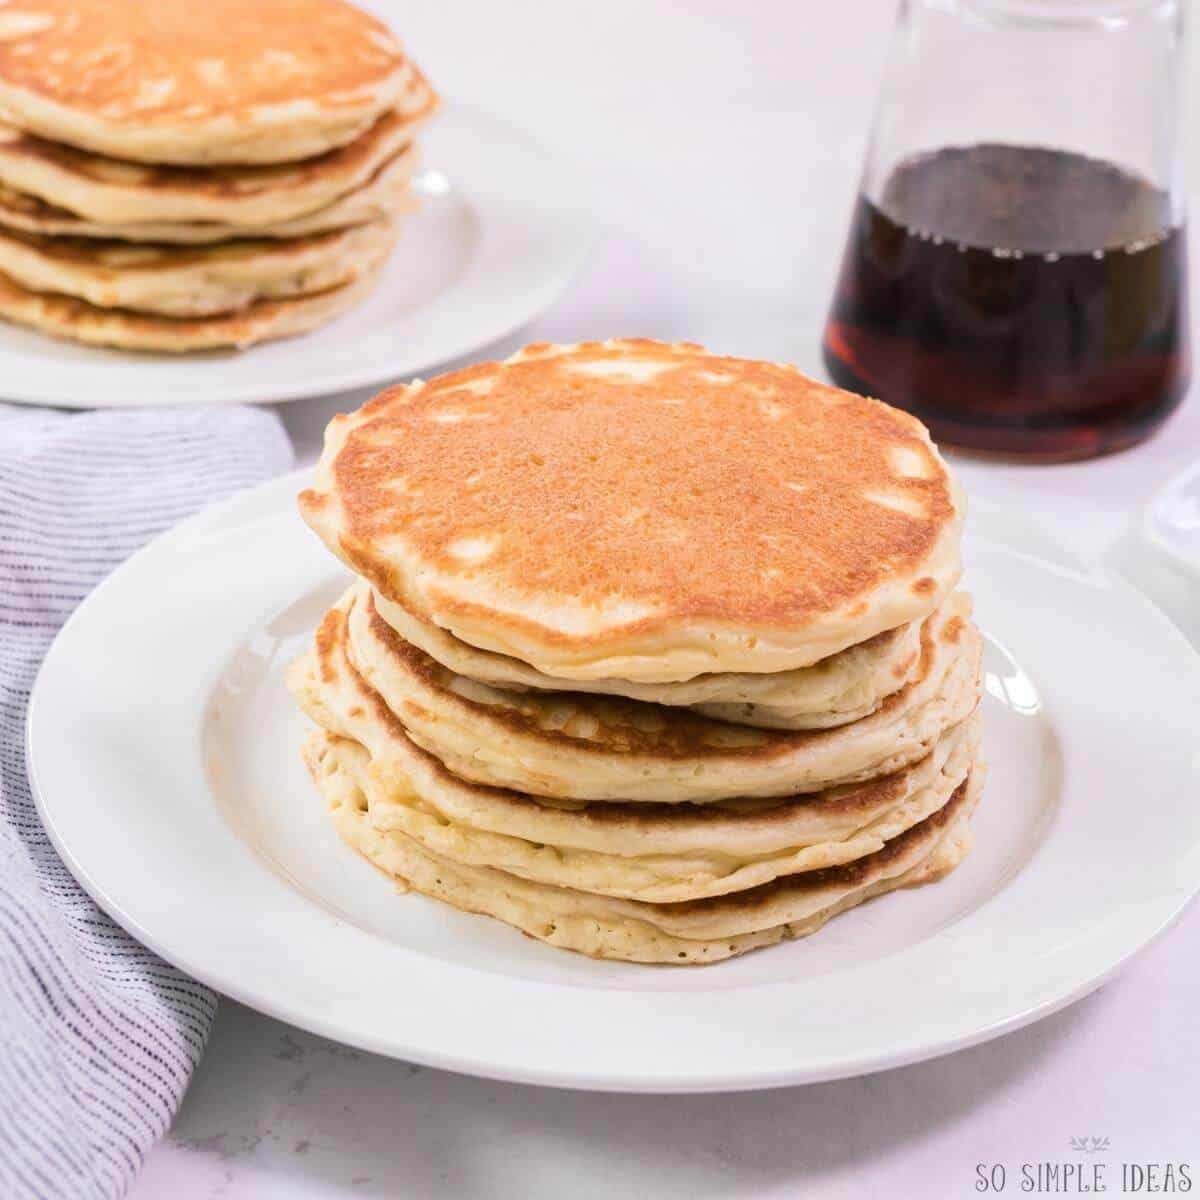 stacks of carbquik pancakes on white plates with syrup container